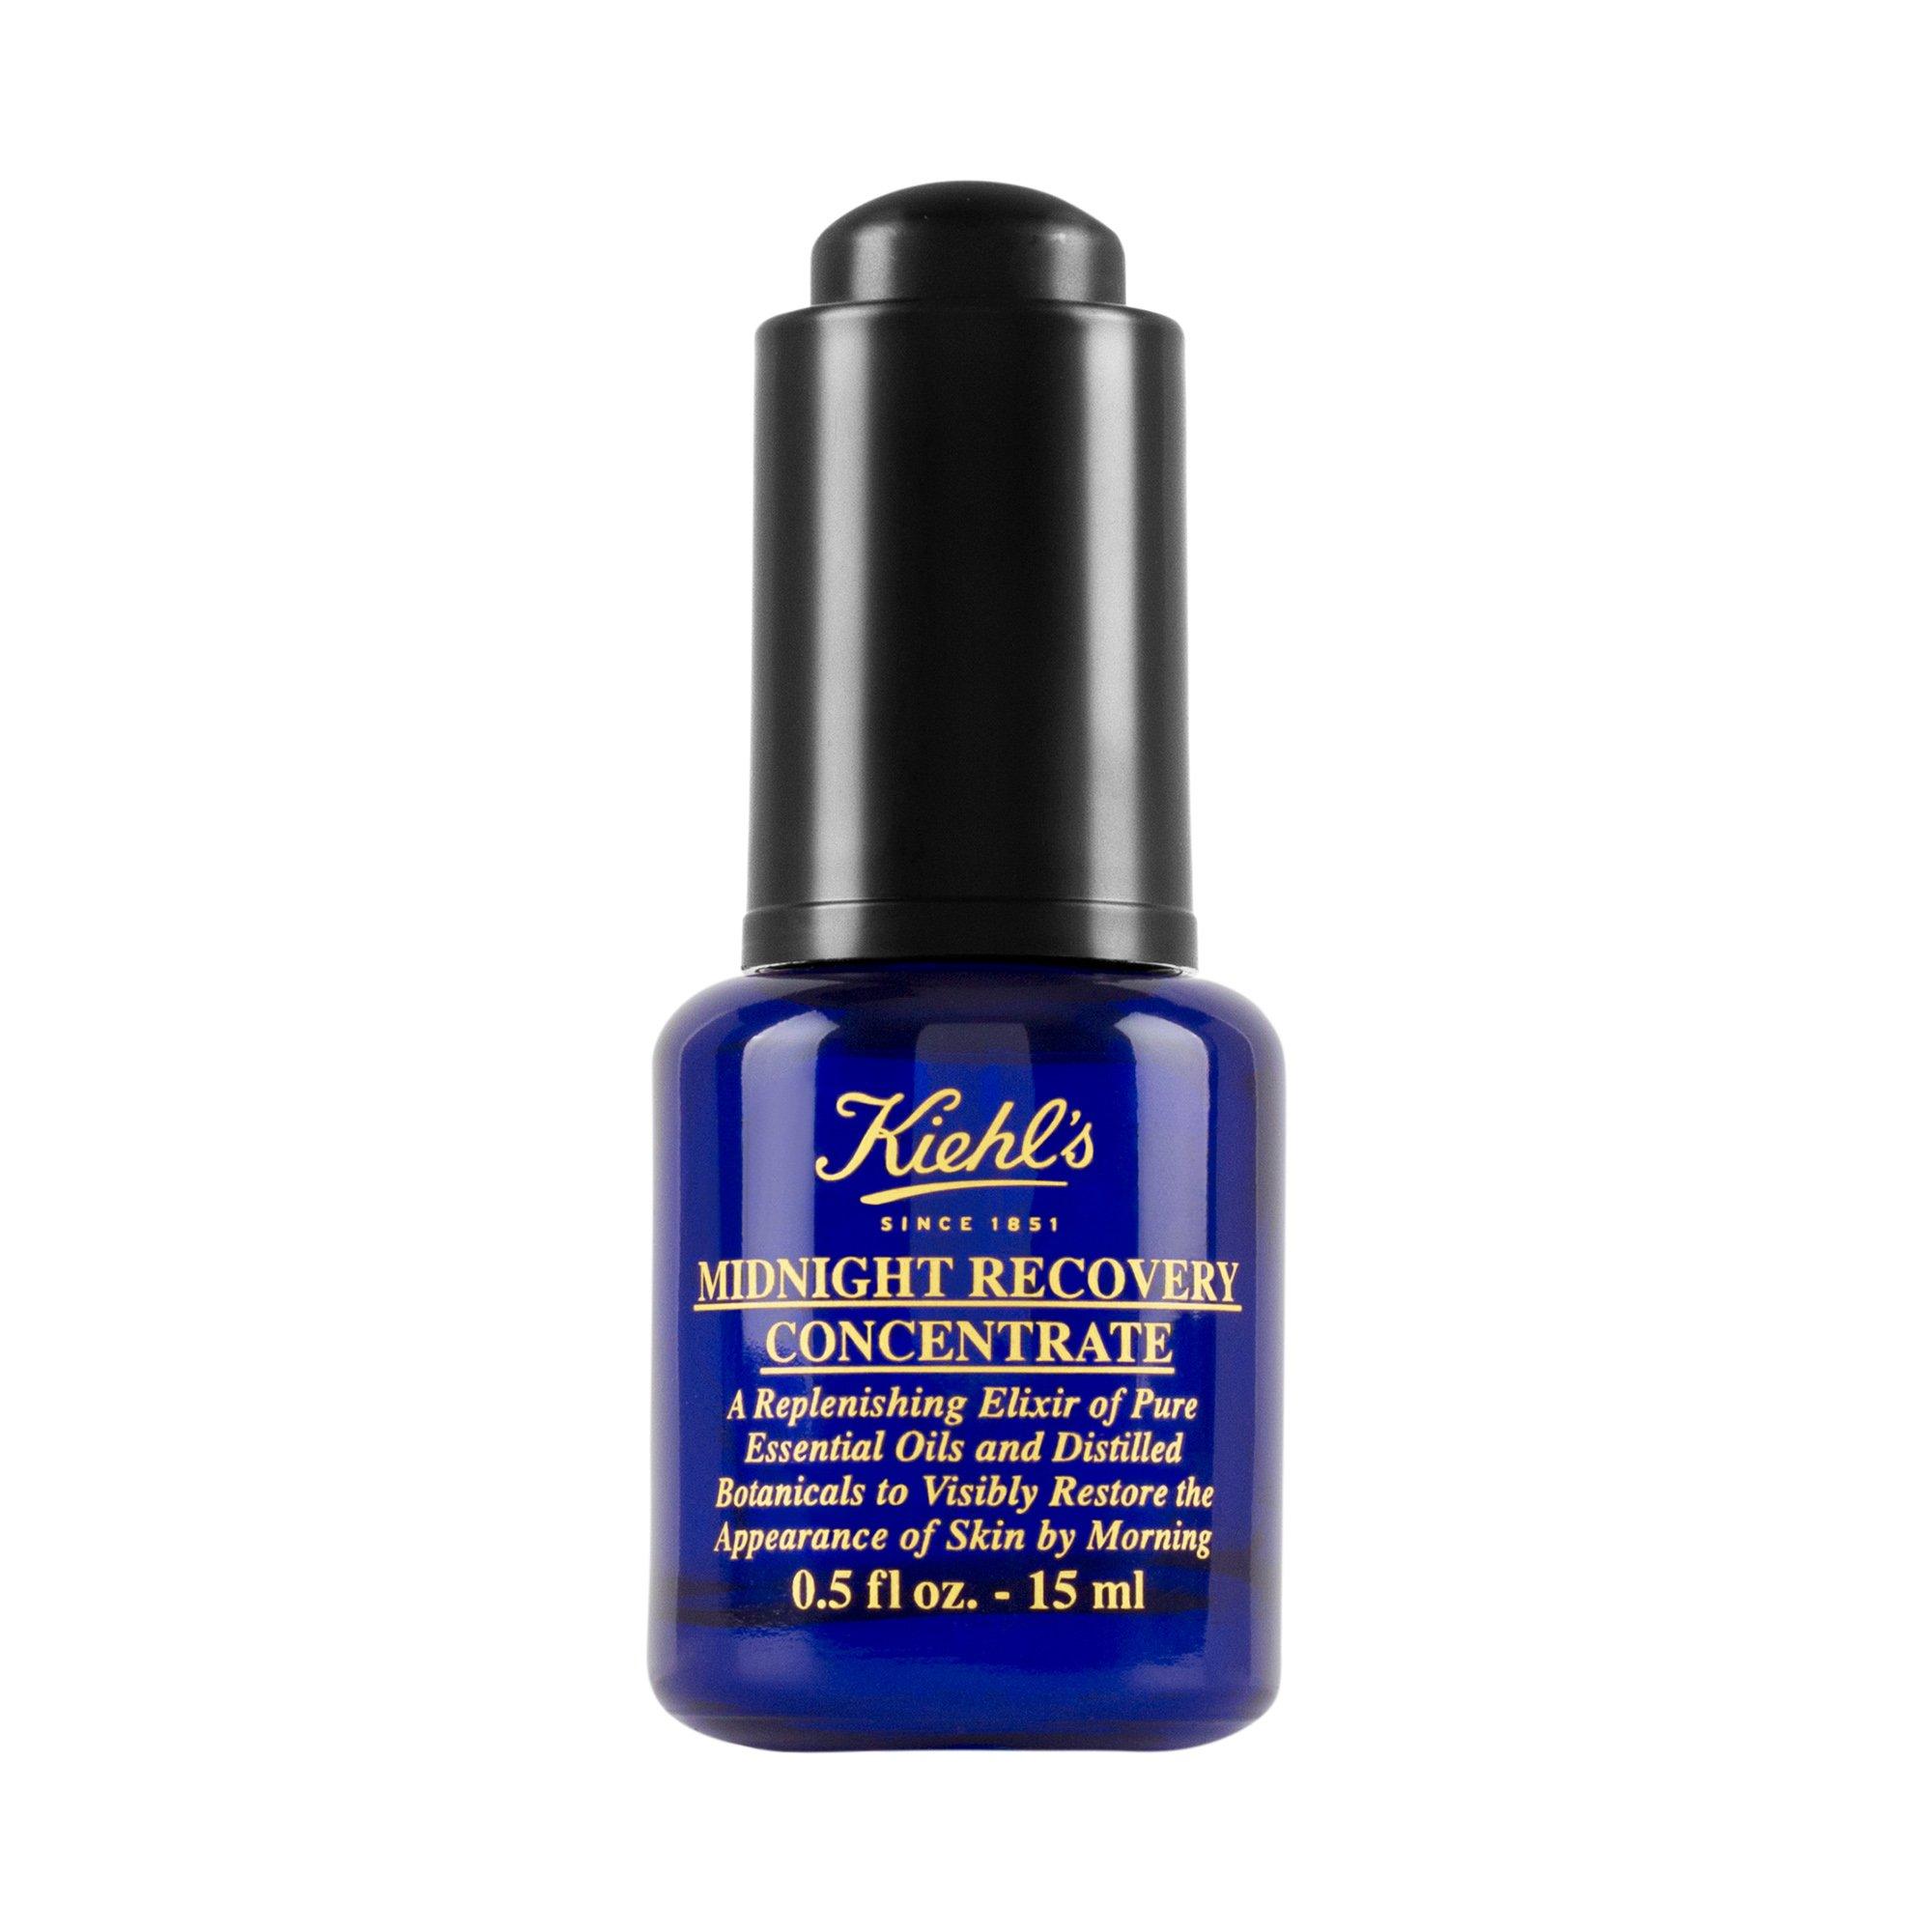 Kiehl's Midnight Recovery MIDN-RECOVERY CONC. 